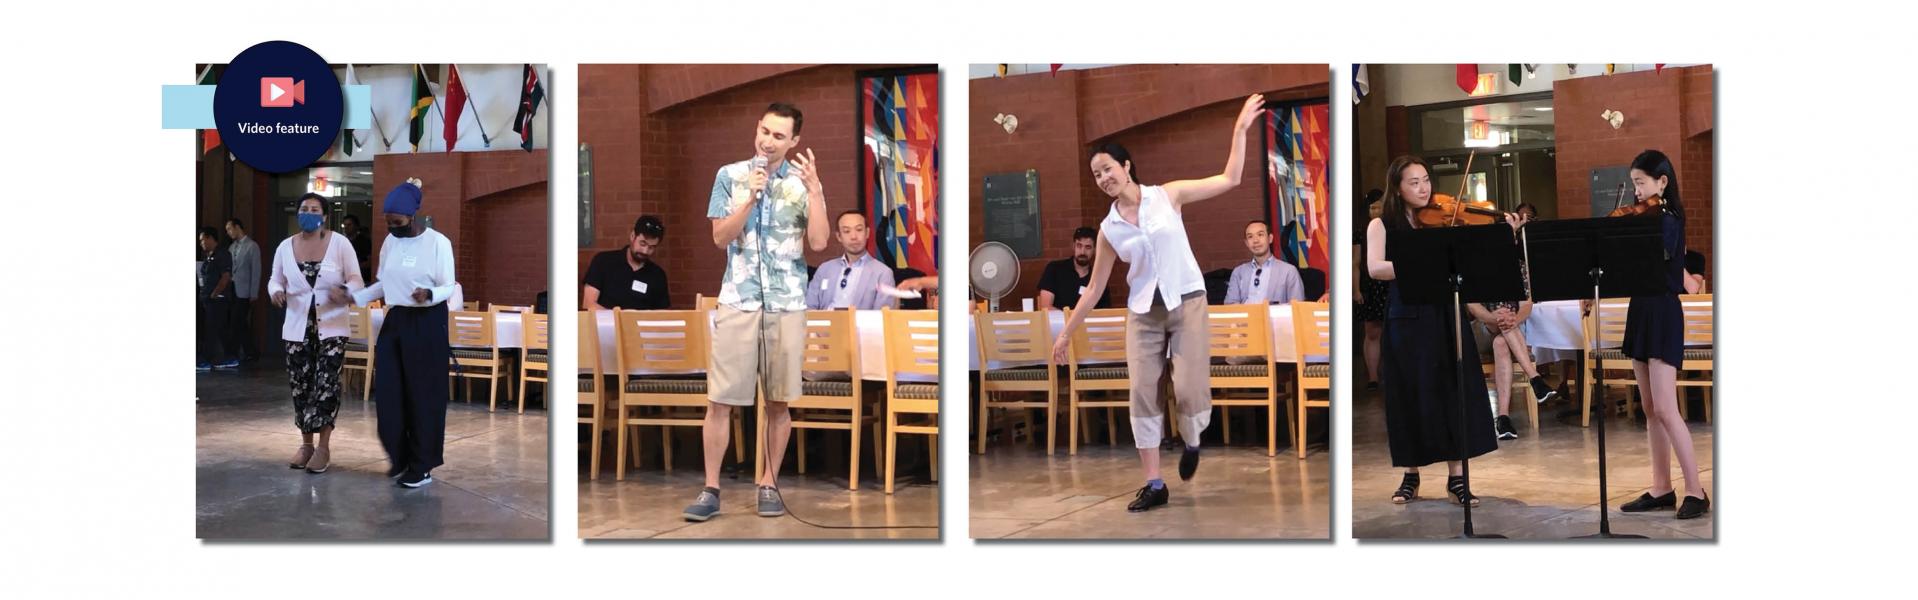 Photos of the four performers at the St. John’s College hot lunch and talent show on July 27, 2022 (Video: Michelle Pentz/UBC)